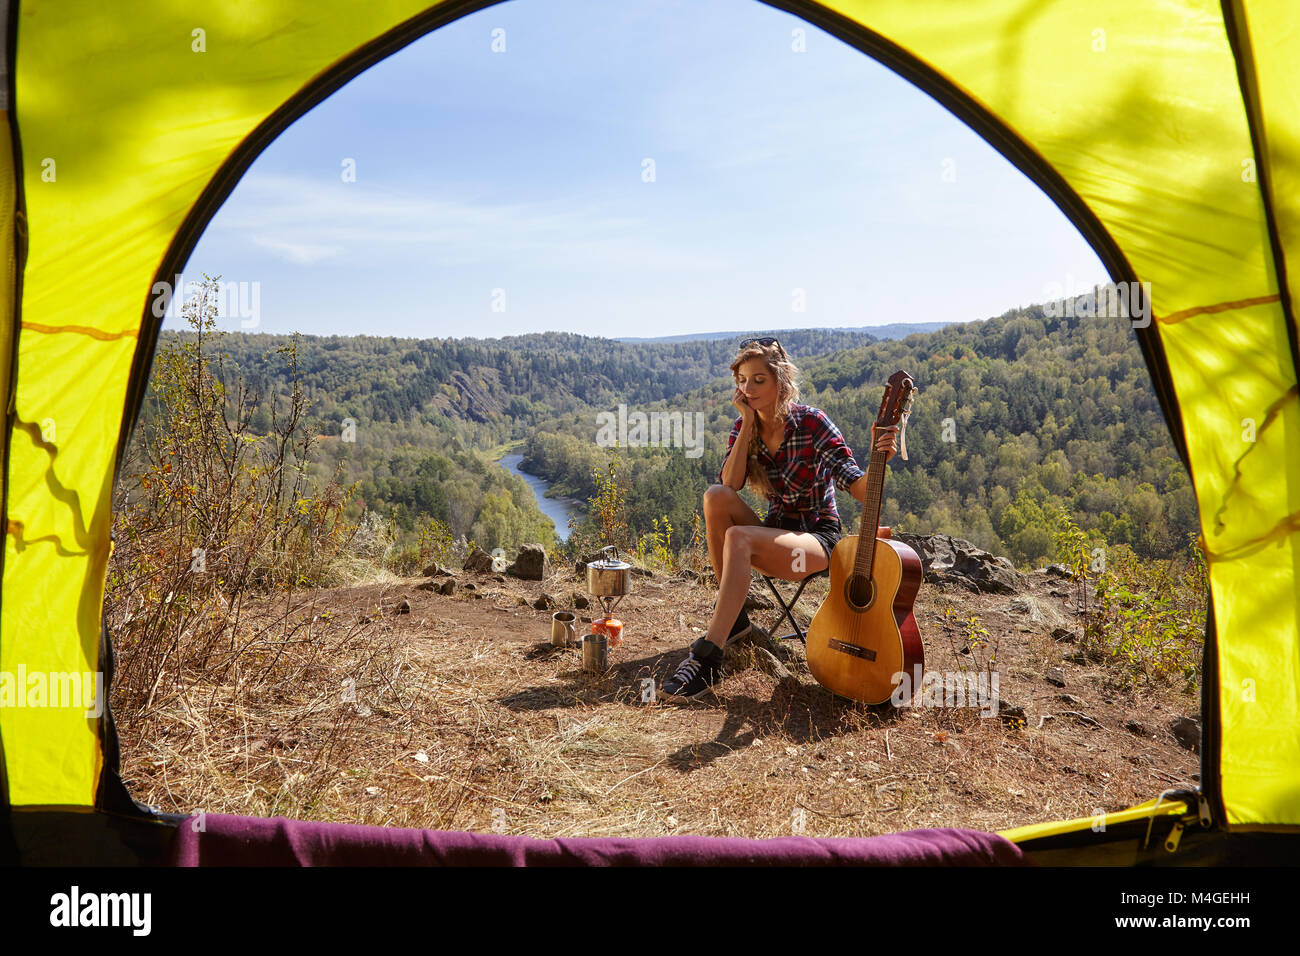 Young blonde woman tourists with guitar in camp on cliff over river and forest landscape. View from camping tent entrance. Stock Photo